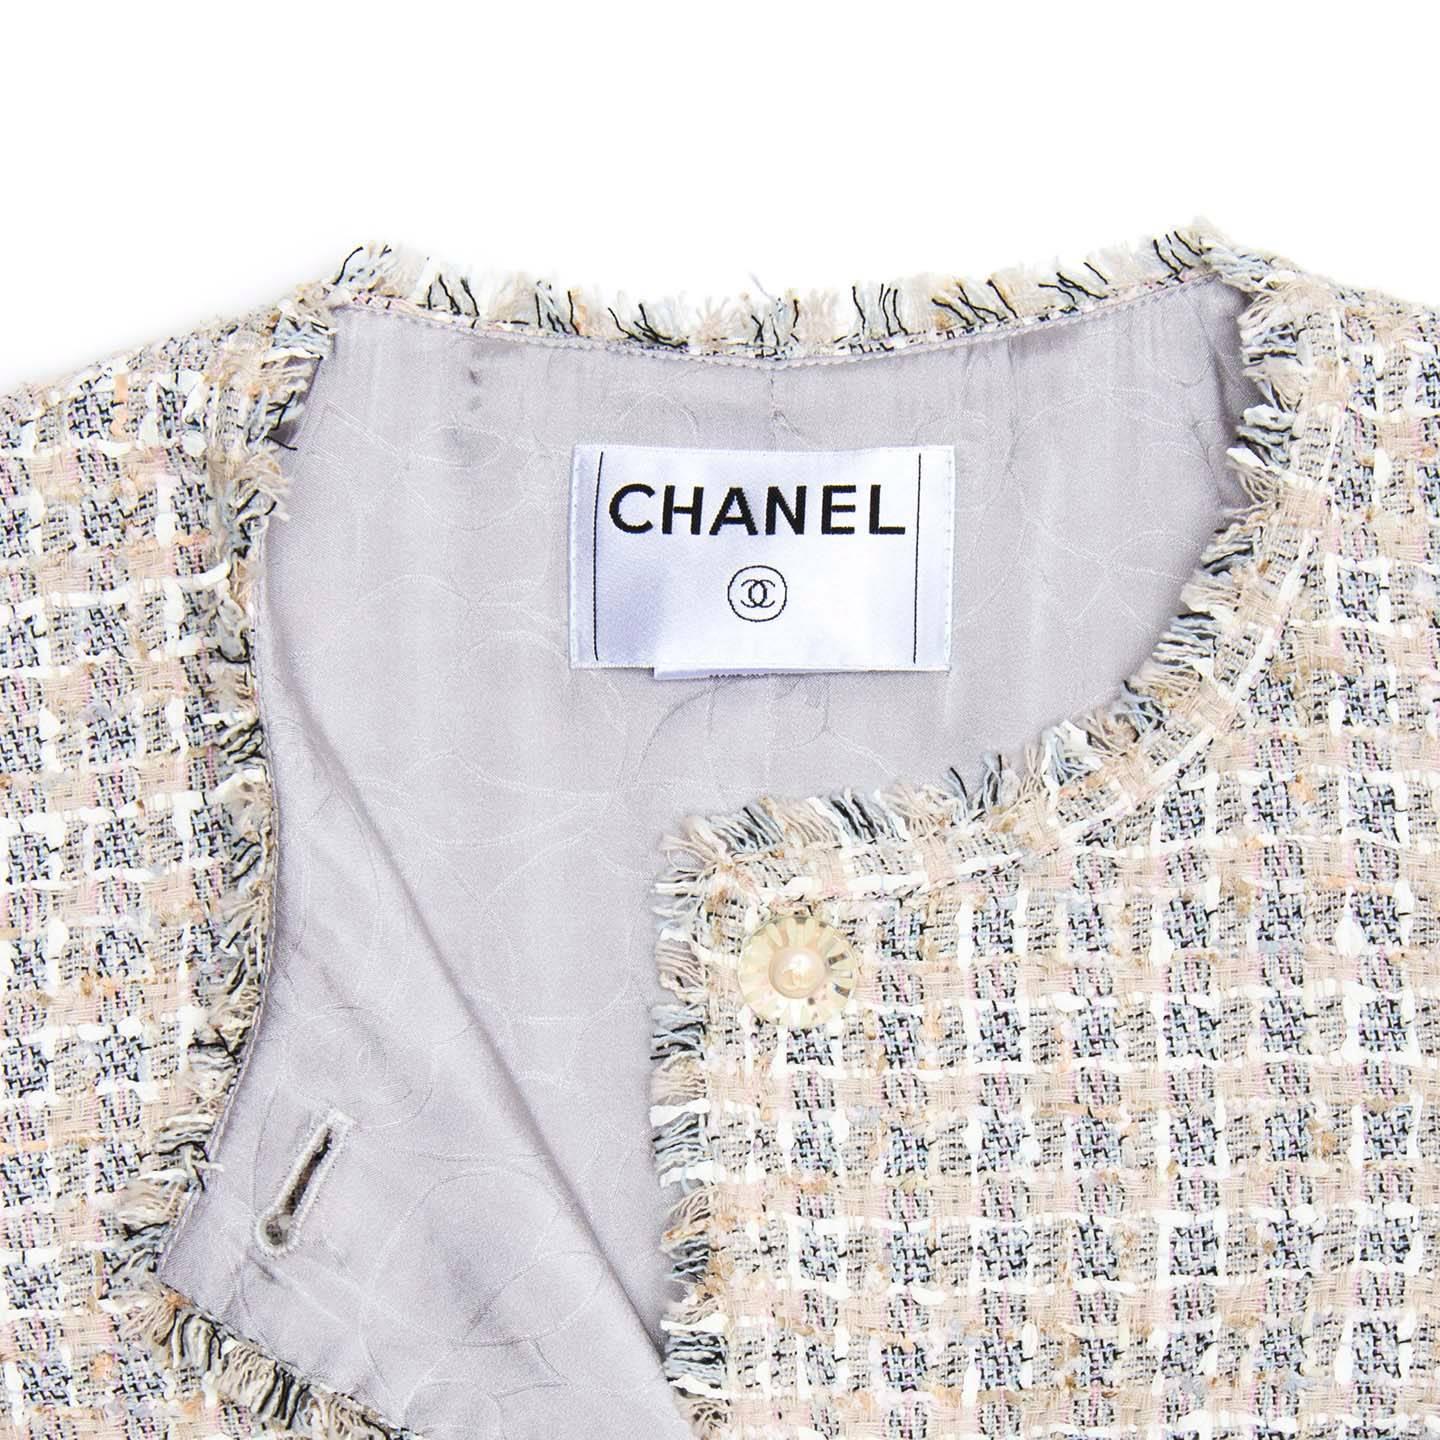 Chanel Multicolor Cotton Tweed Jacket In Excellent Condition For Sale In Brooklyn, NY